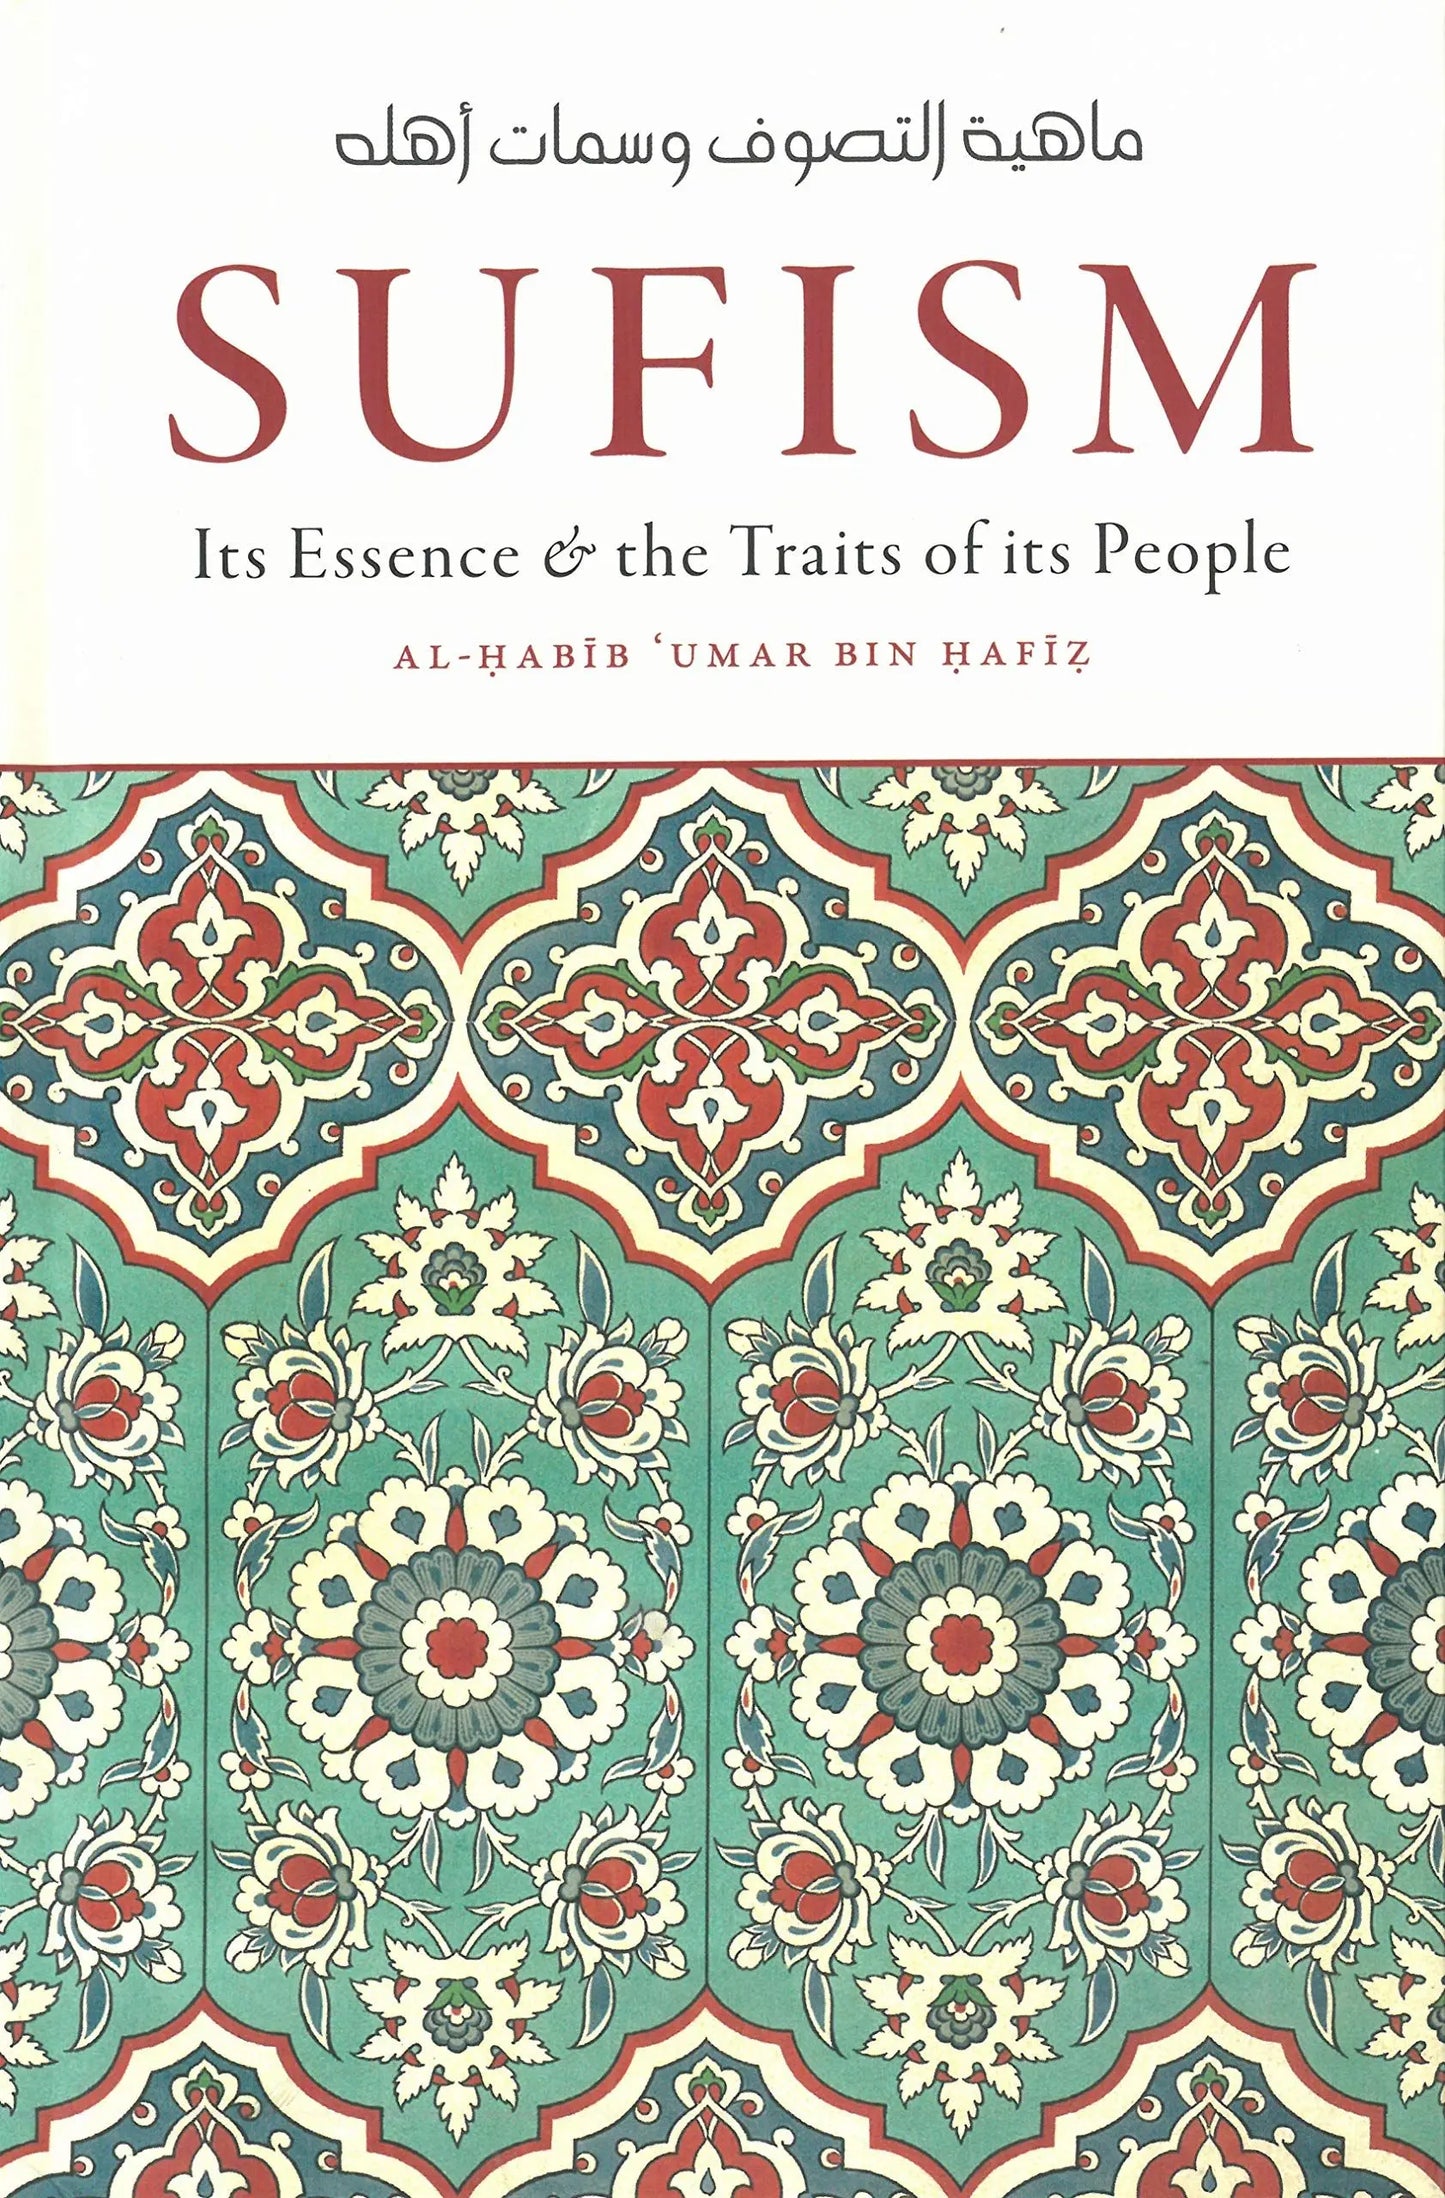 Sufism its Essence & the Traits of its People